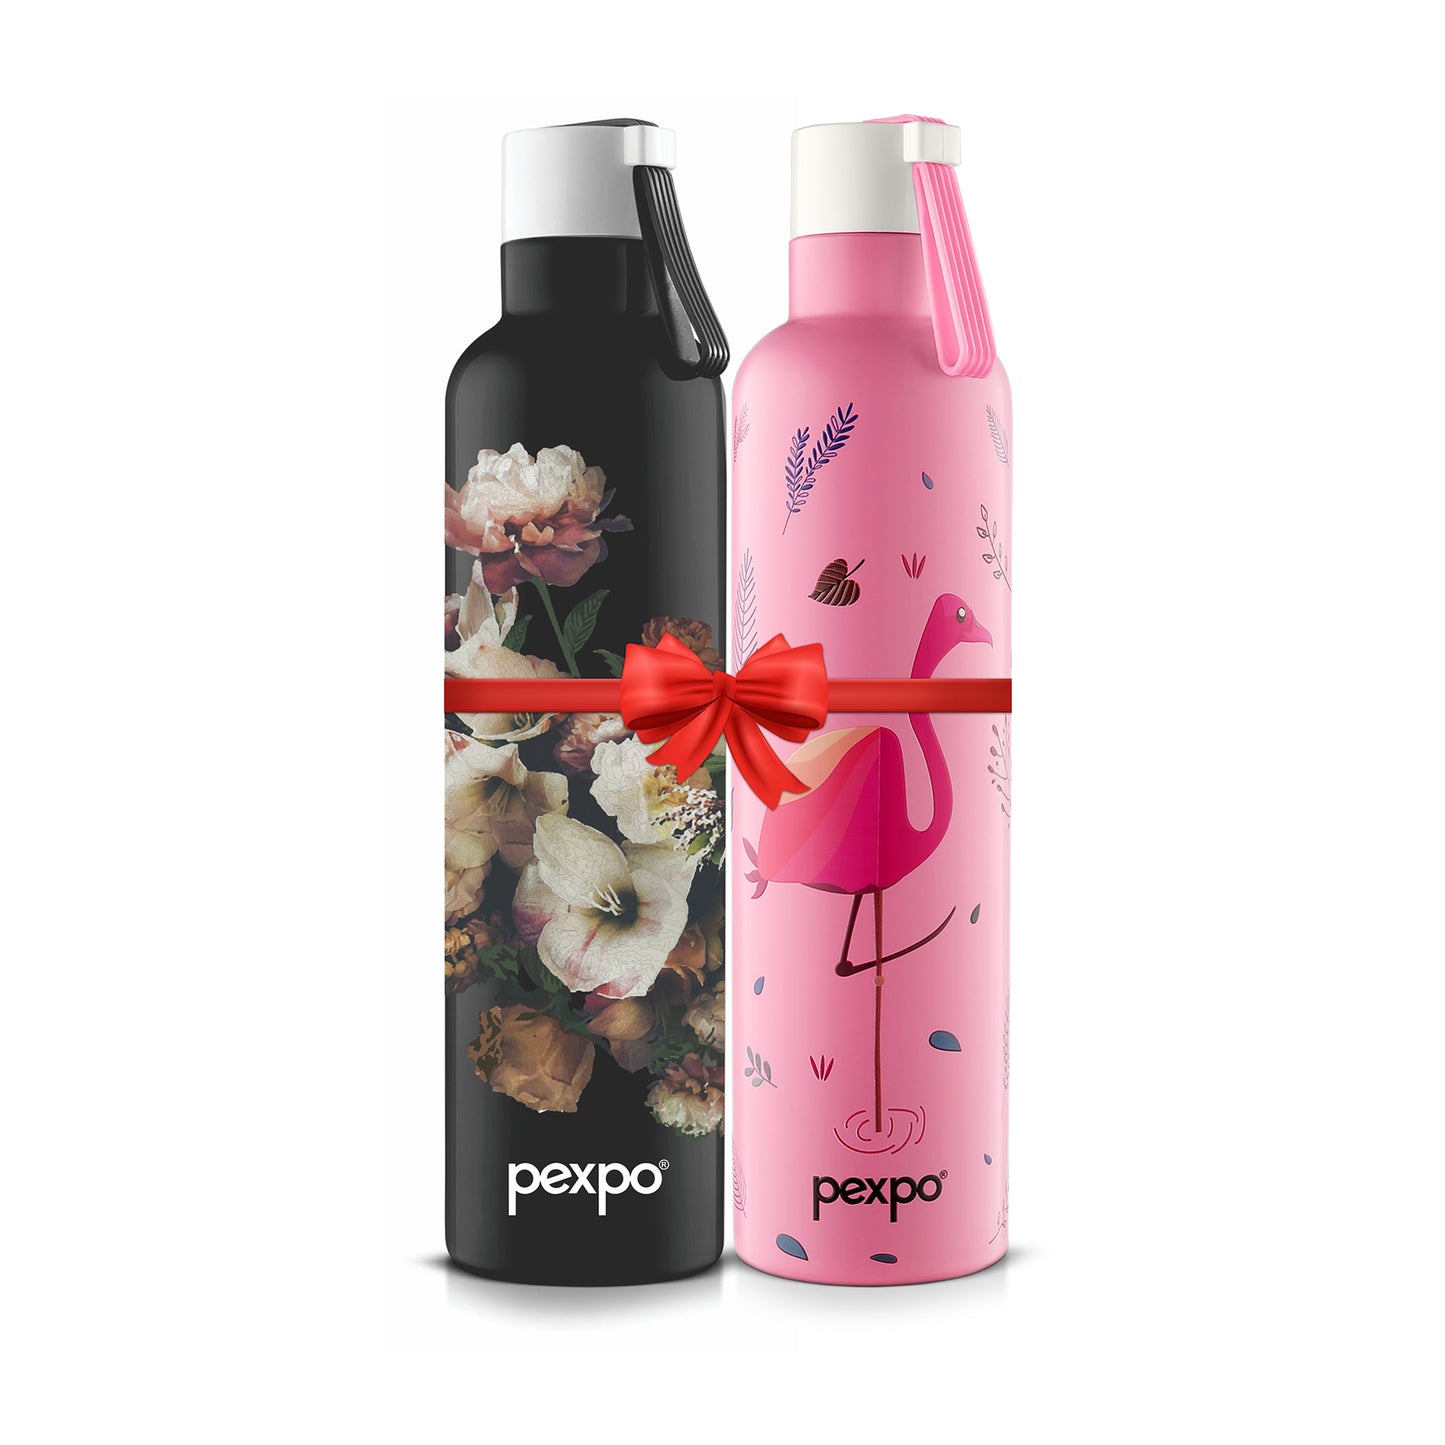 Combo-Oslo Black Floral 750ml (Vacuum Insulated Bottle) and Oslo Pink Flamingo Design 750ml(Vacuum Insulated Bottle)